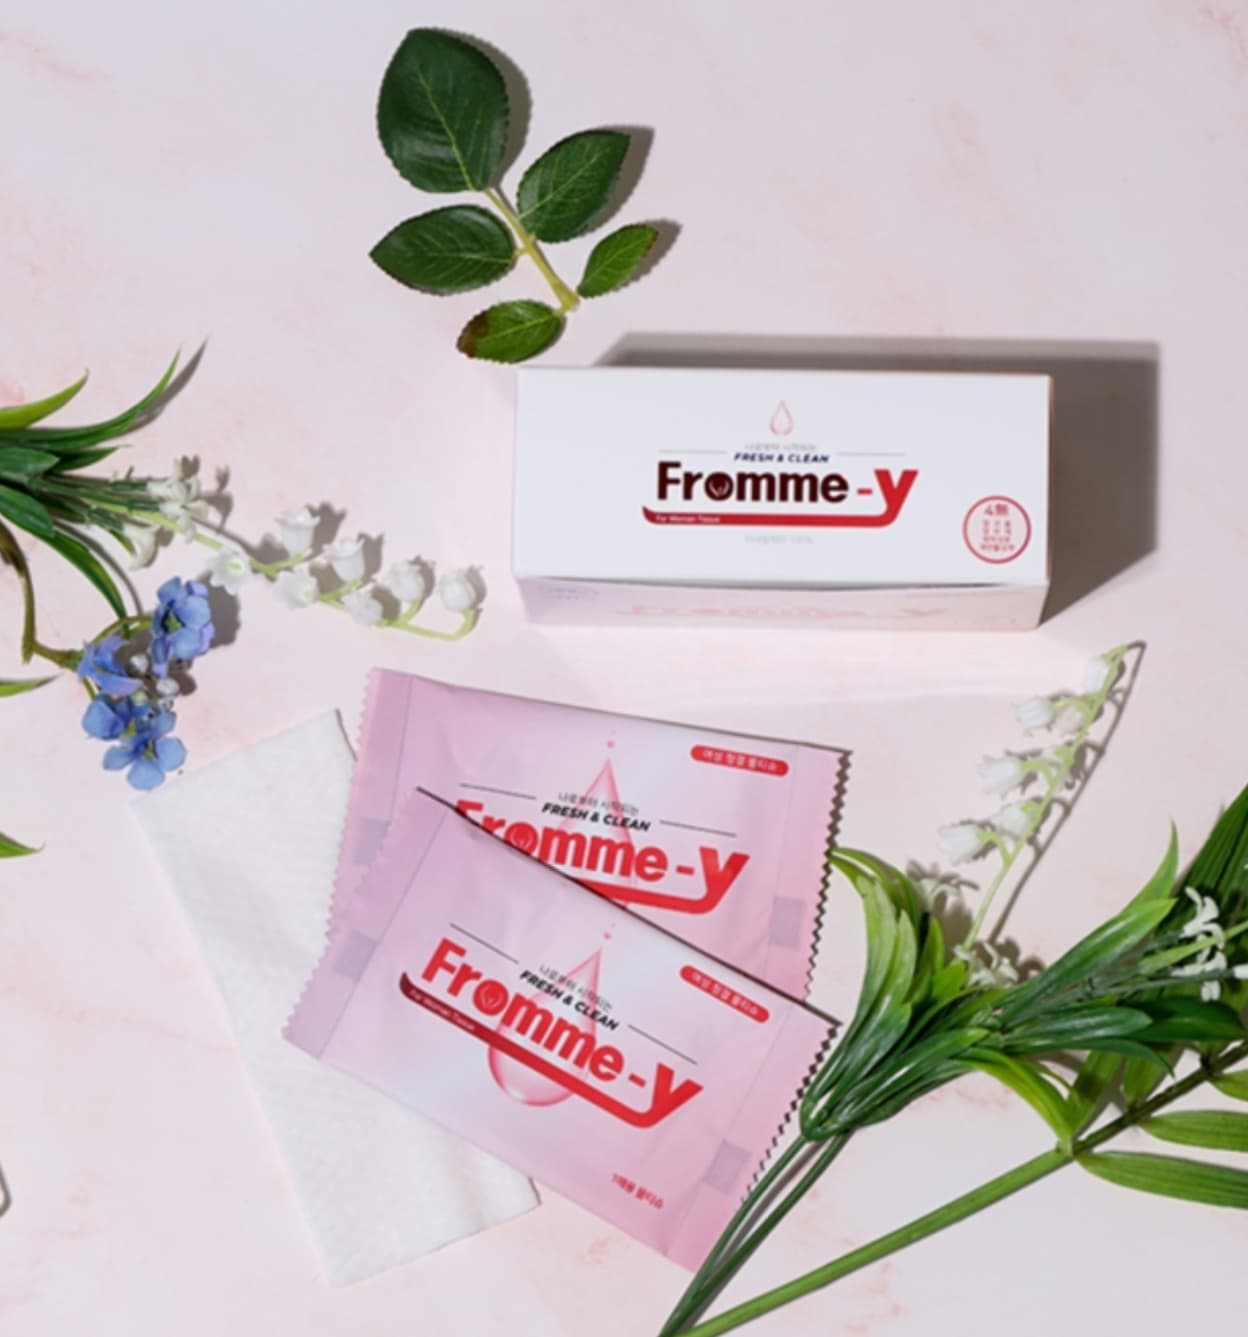 Fromme_y feminine cleansing wipes